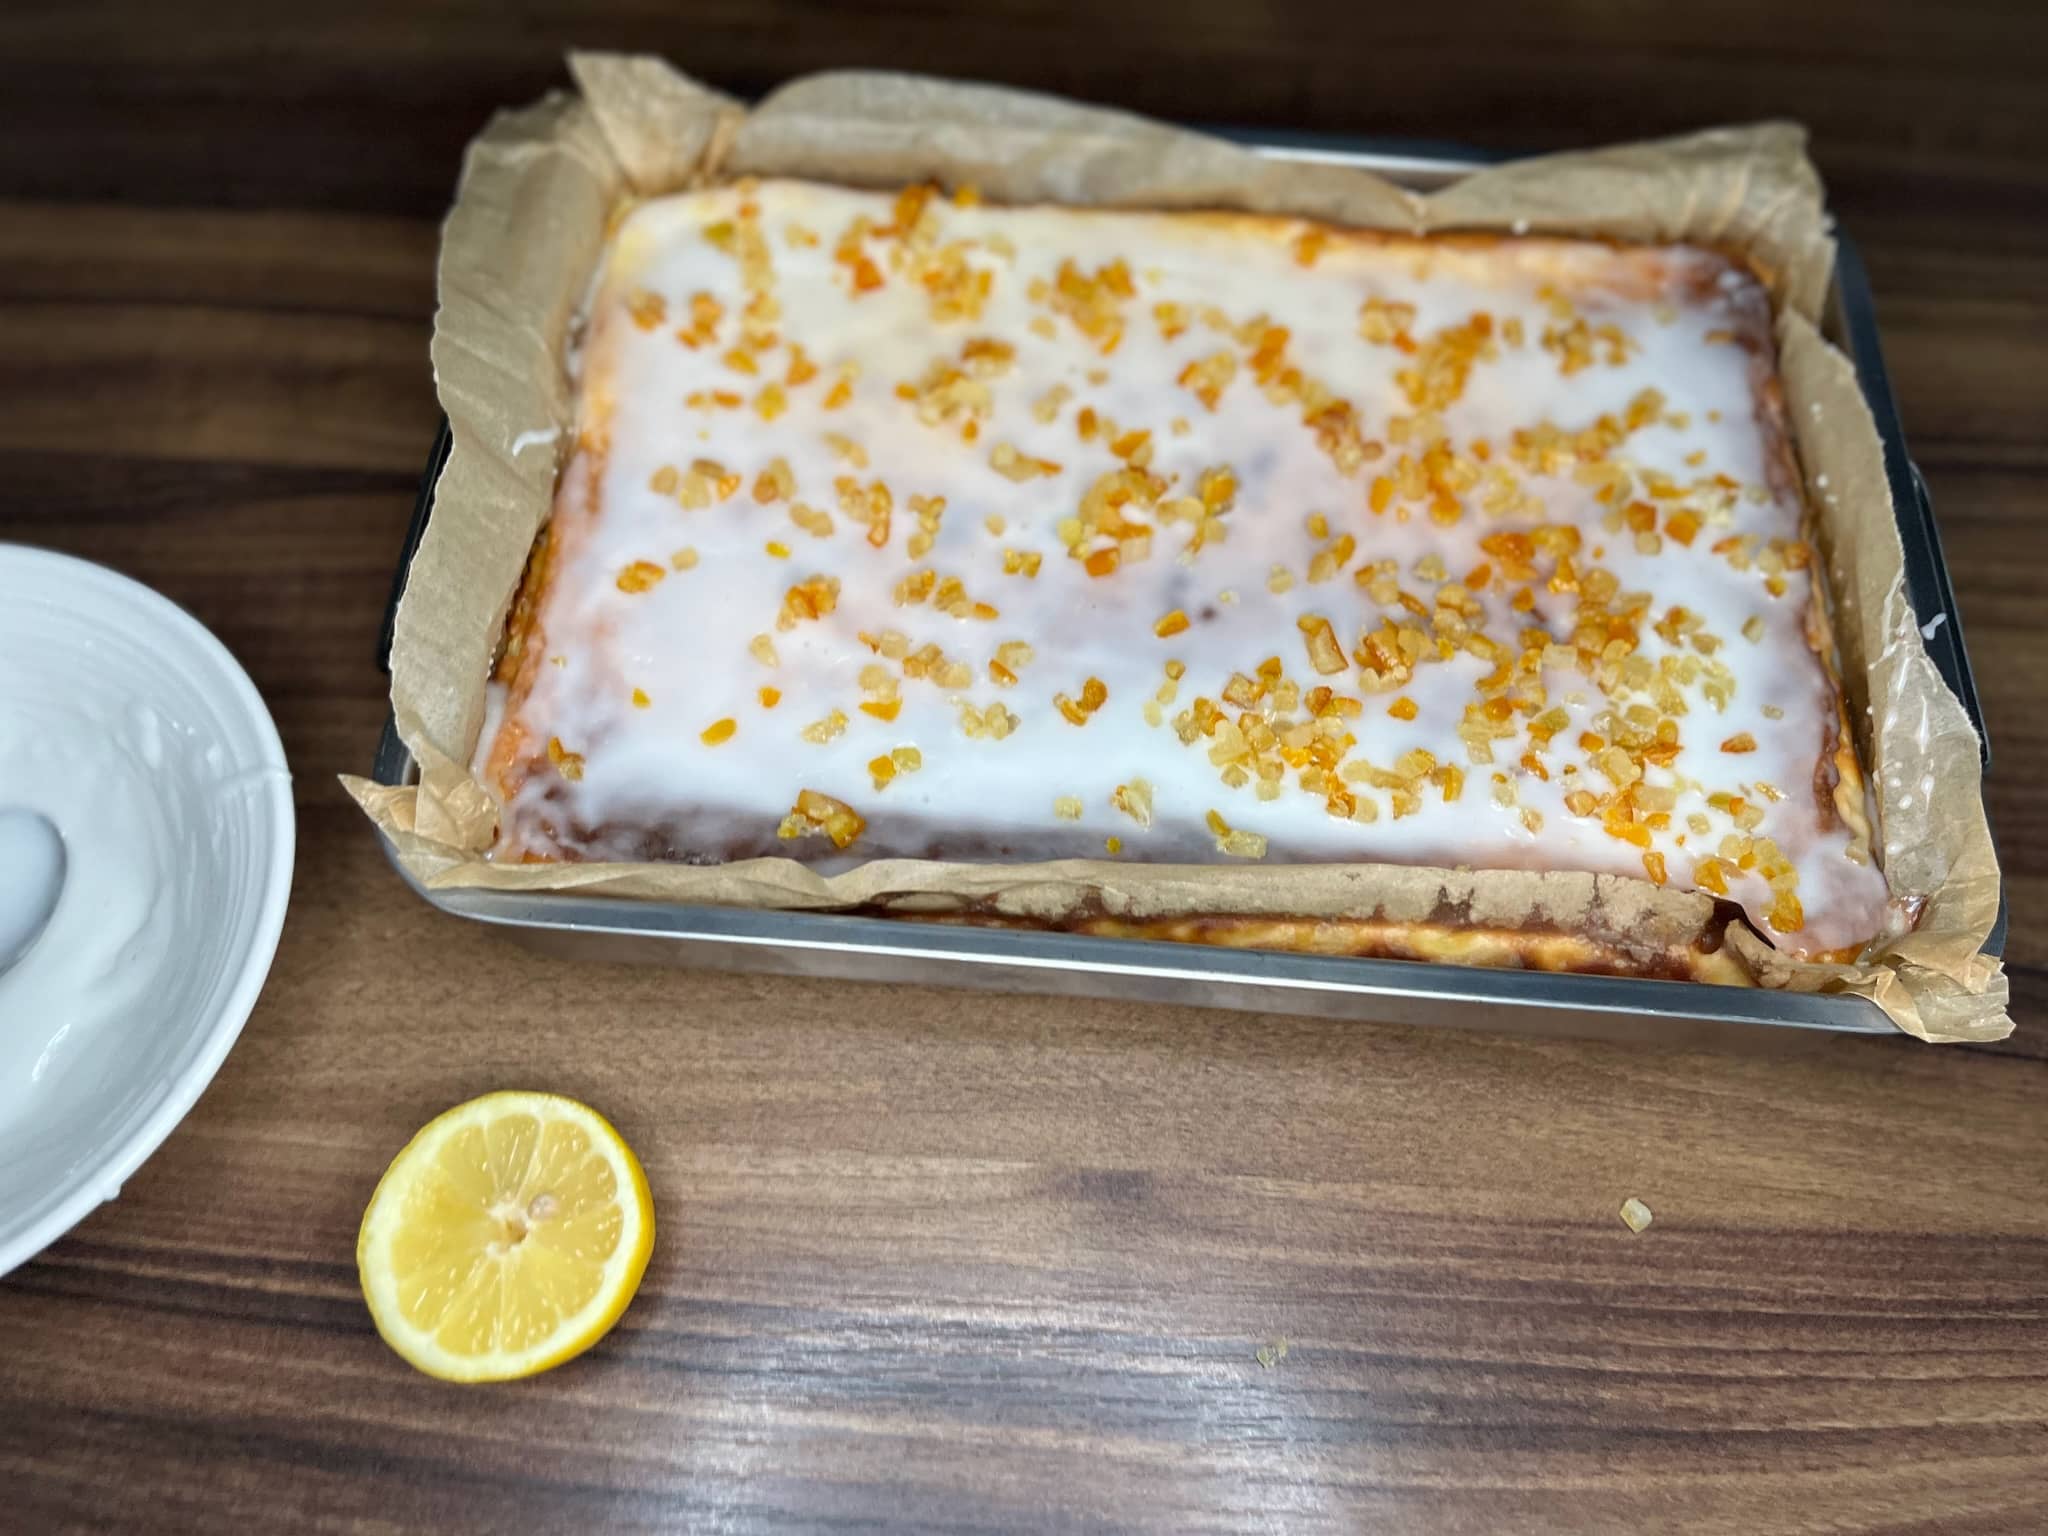 Cheesecake covered with icing and orange and lemon peel still in a tray